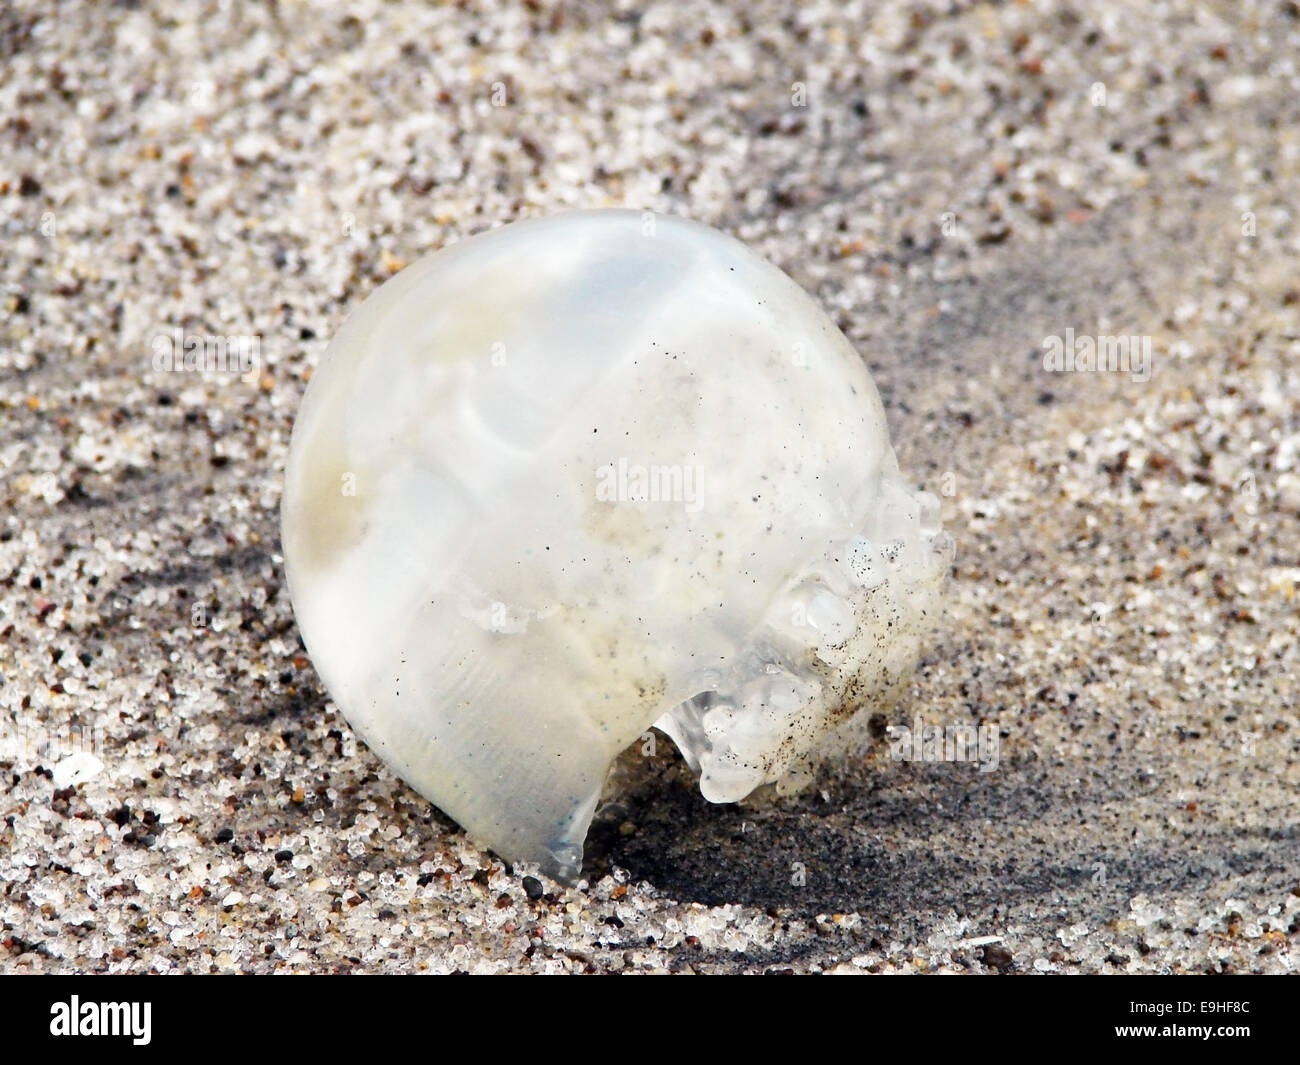 Cute round jelly fish or medusa washed up on the shore or sandy beach. Stock Photo